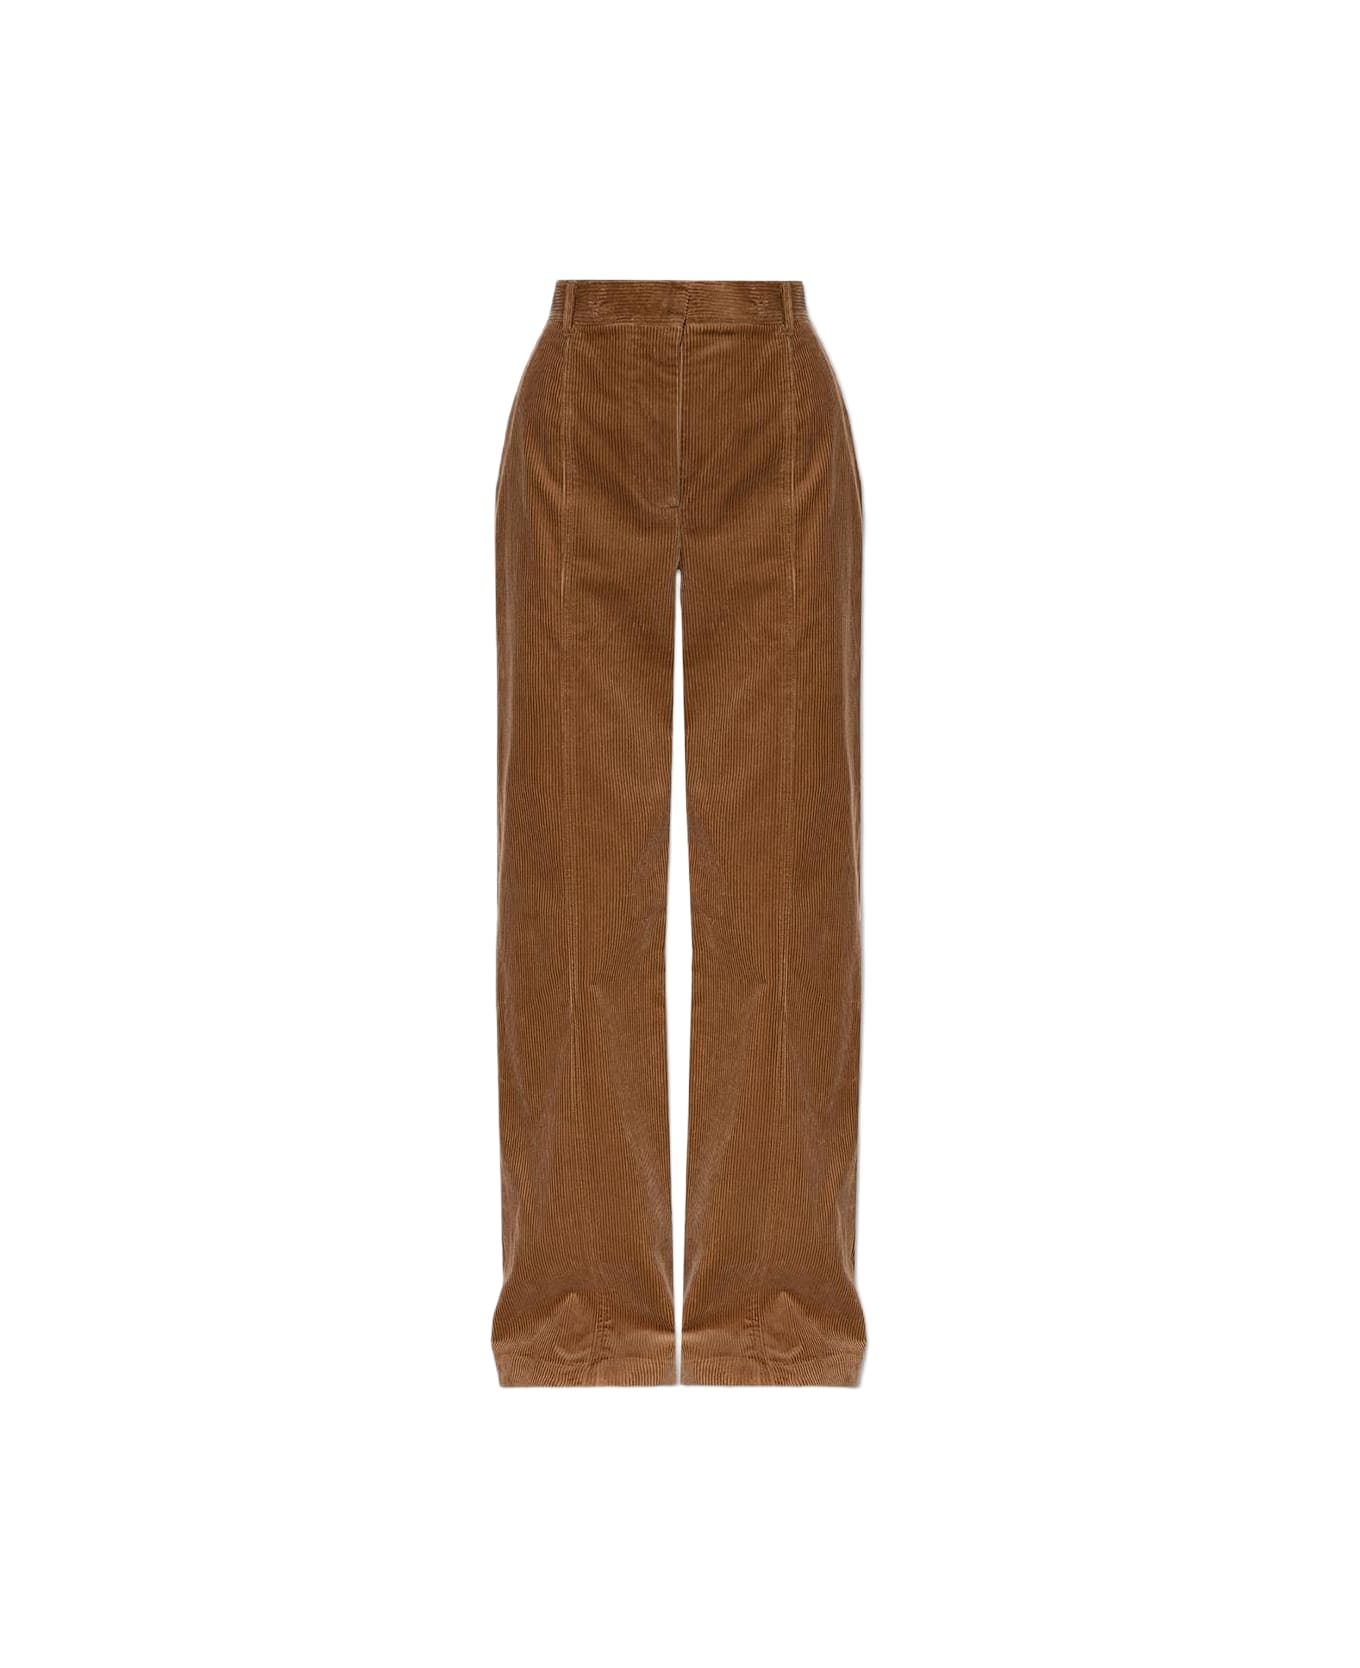 Burberry 'blakely' Corduroy Trousers - BROWN ボトムス